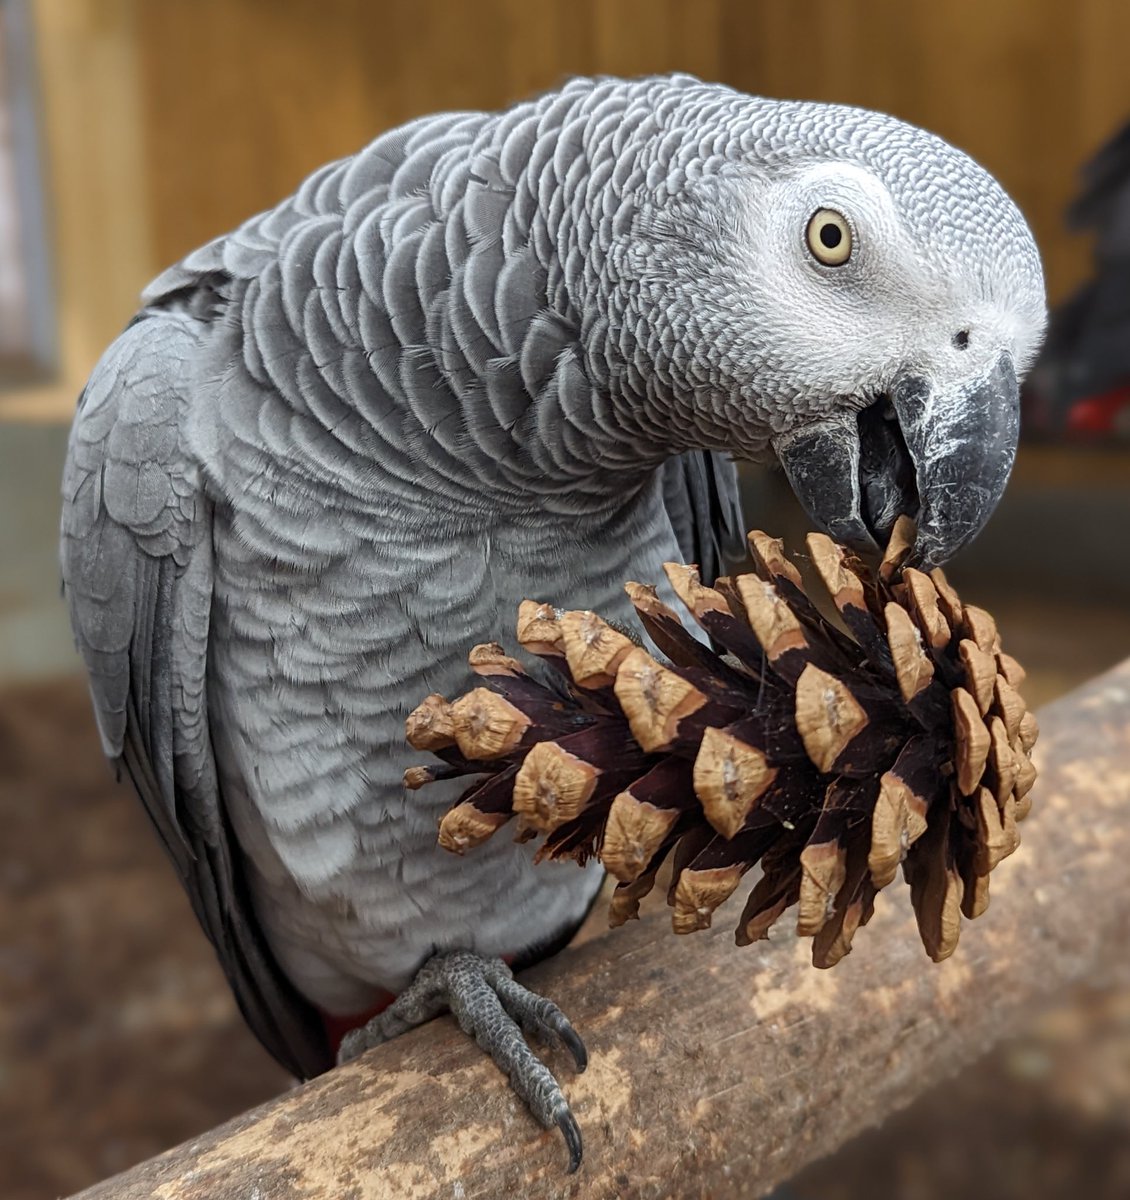 It’s grey outside like our African Grey… but… it’s #friday and we’ve definitely got that Friday feeling!
Visit us this weekend for a fun, family day out… don’t forget your coat and wellies though 🙂🦜
lincswildlife.com
#lincsconnect #lincswildlifepark #dayout #friyay